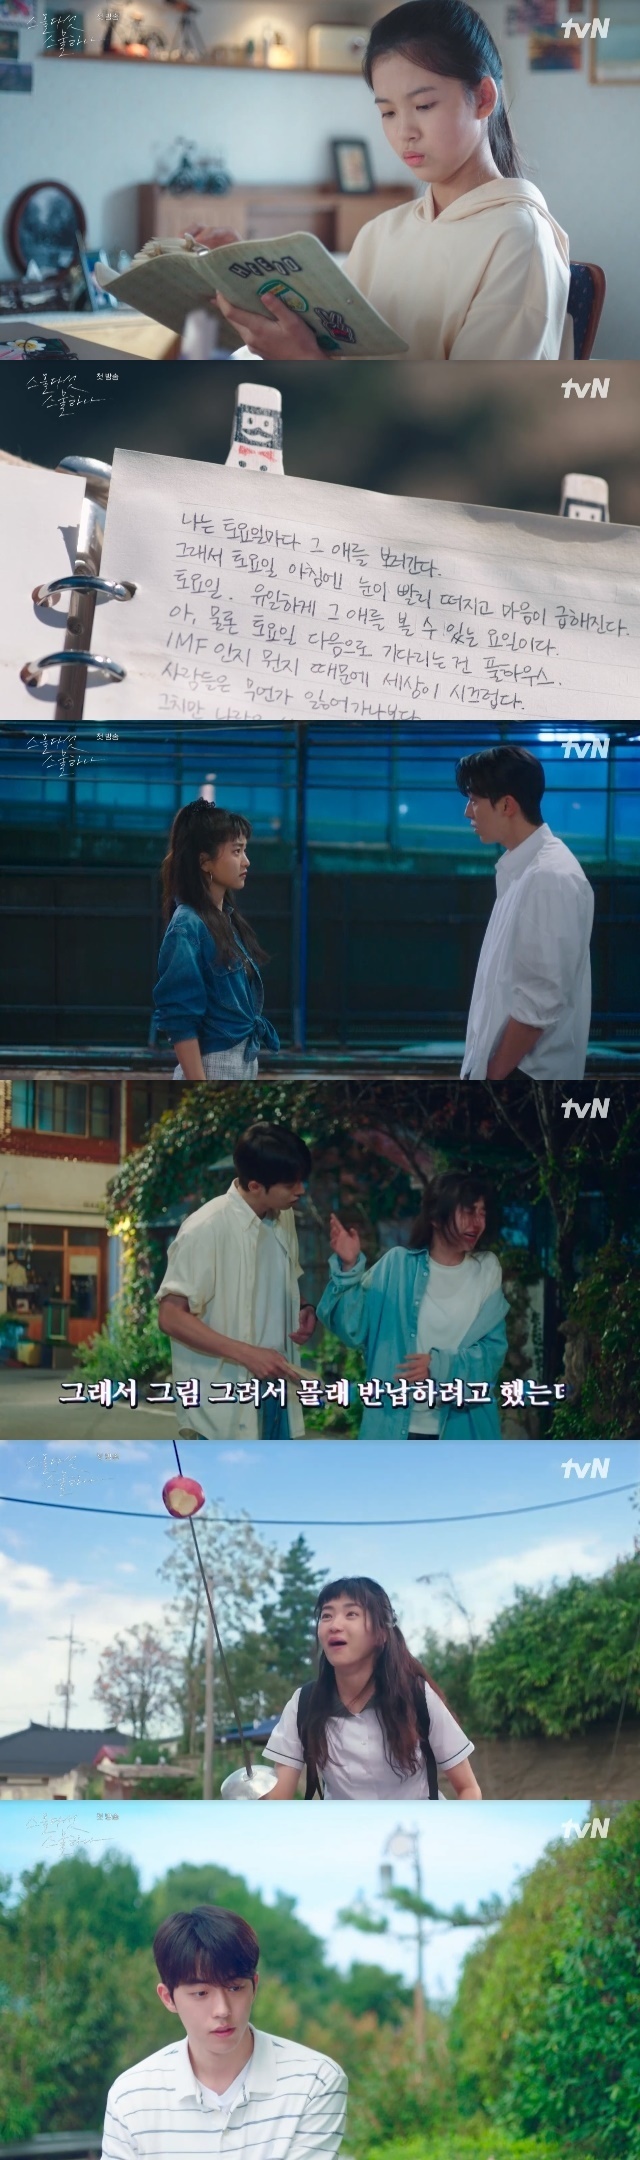 Kim Tae-ri succeeded in transferring to Bonas high school where he admired.In the first episode of TVNs Saturday Drama Twenty Five Twinty Hana (playplayed by Kwon Do-eun and directed by Jung Ji-hyun), which was first broadcast on February 12, Na Hee-do (played by Kim Tae-ri) was played as a teenager.On this day, Na Hee-dos 15-year-old daughter, Kim Min-chae (Choi Myung-bin), fled without showing her stage prepared at the ballet competition.Kim Min-chae told her mother Na Hee-do, who is holding her, that she did not see her competitors finish the stage perfectly in the order before her, saying, It is meaningless if she is not in the first place.Kim Min-chae threw his ballet suits and toes into a trash can in front of Na Hee-do and ran away from his grandmother Shin Jae-kyung (Seo Jae-hee).Kim Min-chae found a diary written by Na Hee-do in the room of her mother Na Hee-do. Kim Min-chae mentioned the diary of Na Hee-do in the diary of I was surprised and started reading the diary with my eyes shining. So Na Hee-dos story began in July 1998.The child Na Hee-do wanted to see every Saturday was not his ex-boyfriend, but the object of Na Hee-dos longing: the Sun and Fencing Departments Go Yu Rim (Bona Boone).Na Hee-do, who had seen the scene of the Kyonggi of Yu Rim in the past, grew up dreaming of becoming a rival of Yu Rim.However, the IMF broke out and the fencing department was closed at the school where Naheedo went, and Naheedo was advised by his nickname Injeolmi chatter to Go to his world if your world disappears.Na Hee-do wanted to transfer to the Sun Goro Noguchi, and before he went, he visited Kochi Yang Chan-mi (Kim Hye-eun), a sun-high fencing department.Na Hee-do kneeled in front of Yang Chan-mi and informed the closing of his high school fencing department, saying, If you accept me, I would like to transfer to the sun Goro Noguchi.Yang Chan-mi promised that Na Hee-do would accept it if he came to transfer with his own power.But the transfer was not easy. Na Hee-dos mother, Shin Jae-kyung, said, Since the fencing department is closed, I was rather good at Na Hee-dos request to send the transfer.Na Hee-do aimed at forced transfer. Na Hee-do initially challenged students who seemed somewhat poor at school, but failed to get into a fight when they did not work.Na Hee-do made a more full-fledged flight: finding Knight as a minor, where Na Hee-do met with Lee Jin (played by Nam Joo-hyuk).Lee Jin finally delivered a newspaper to Na Hee Dos house and became involved with a comic bookstore regular and a part-time student.Lee Jin was trying to protect Na Hee-do as much as he knew her minor status, and he had a fight with a friend who showed inferiority to him.Lee Jin, who pulled Na Hee-do from the Night safely, learned of Na Hee-dos plans to force her to transfer, so she said, You know why the law protects minors? Because of lack of imagination.You think whats really happening is in your imaginary category? When you come here, theres a lot more Na-eun things going on without your life.When I do bad things, the imagination of the adult and the imagination of the minor are different. Na Hee-do said, Then what I should have done: I lost my dream overnight, the fencing department was gone, I wanted to keep fencing, and my mother told me to stop fencing and study.Its not you who took my dream, its the times. Who the hell can take my dream?Then the back Lee Jin said, The times can take your dreams away enough, you can take your dreams as well as your money and you can take away your family, and you take all three of them at once.I didnt screw up your plan today. I screwed up because it was wrong. Re-establish it, plan.But Lee Jin said, Youre right about keeping your dreams, your plans are wrong, but your will is right. I always think about losing, but you think about getting.I want to do that now, he said.Lee Jin told Na Hee-do that day that his house had been ruined. They shared a statement and got close.Na Hee-do, who returned home after that, said, I had the courage to think about it, but I did not have the courage to persuade my mother. Injeolmi seemed to ask, You live in a neighborhood ...Na Hee-do once again expressed his desire to transfer his courage to my mother, Shin Jae-kyung, but Shin Jae-kyung pushed Na Hee-do for not having talent.Do you think Mom has something Na-eun more than that comic book? Mommy never came to see my Kyonggi.It wasnt my mom who comforted me every time I lost Kyonggi and was upset. But what kind of a torn-up.You didnt know I was brave enough to tell her I wanted to transfer. She needed more courage than when I went to Night.He doesnt want to talk to me, he shouted.Na Hee-do again visited Yang Chan-mi and reported that he had failed in the transfer plan.Na Hee-do said he would show his skills instead, and he passed the first test by putting an apple thrown by Yang Chan-mi in a fencing knife.Yang Chan-mi then sat Na Hee-do and teased him for a long time on the pretext of the second test, and gave him the final pass.